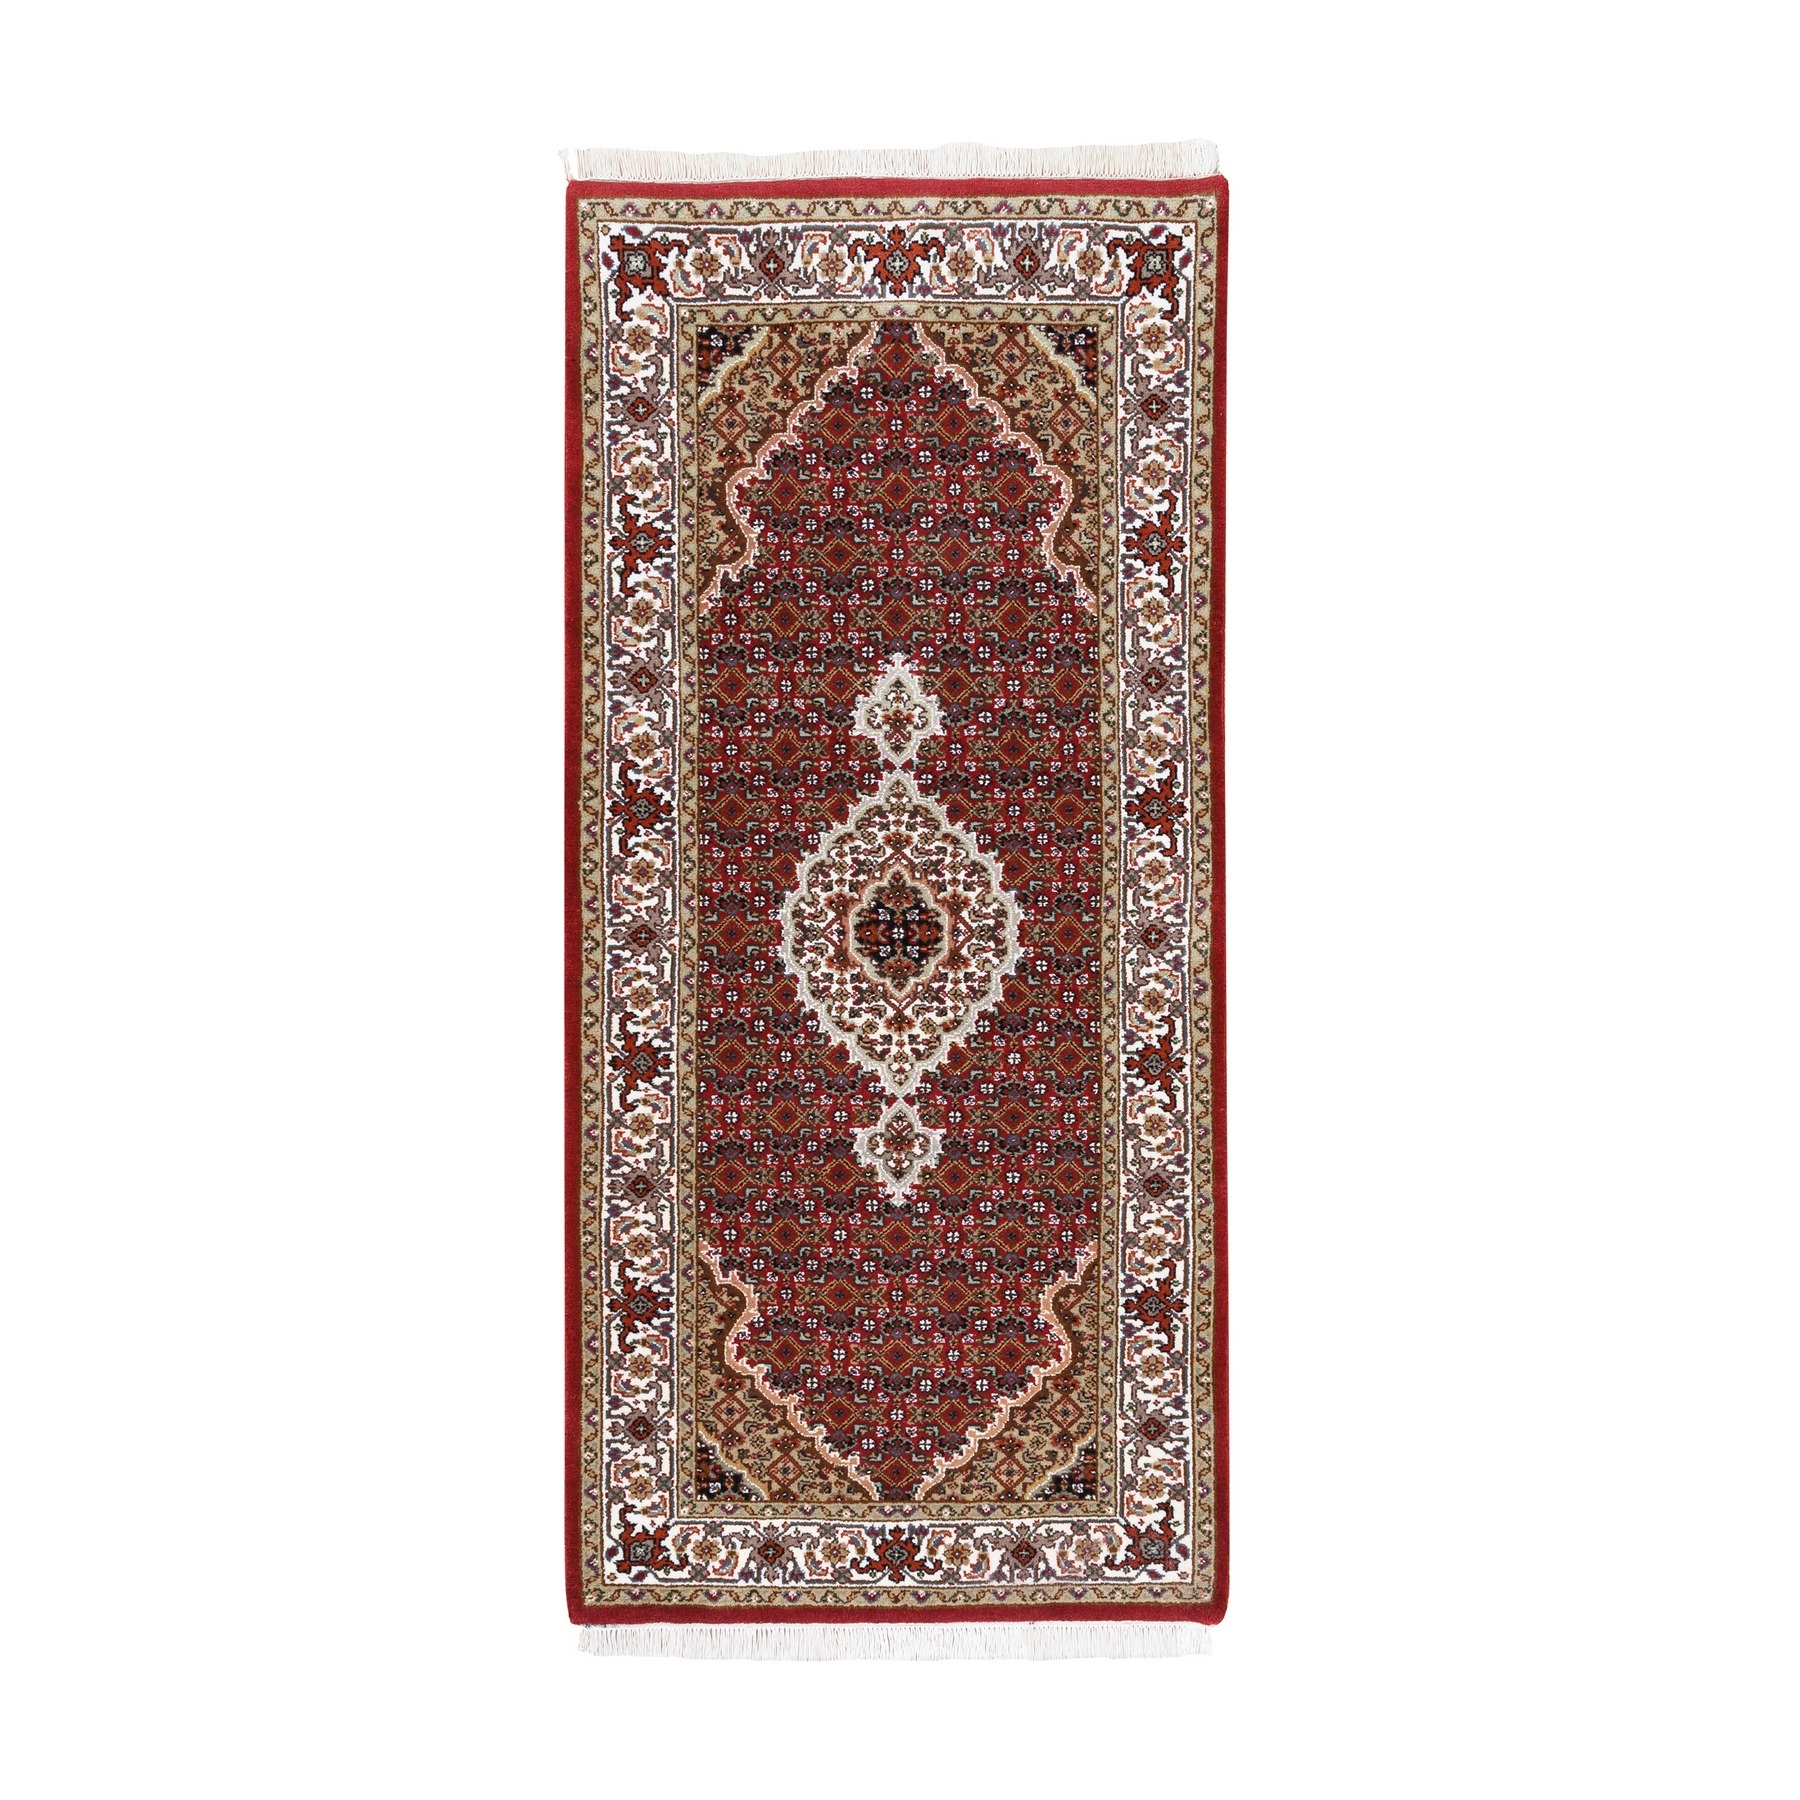 Pirniakan Collection Hand Knotted Red Rug No: 1125076